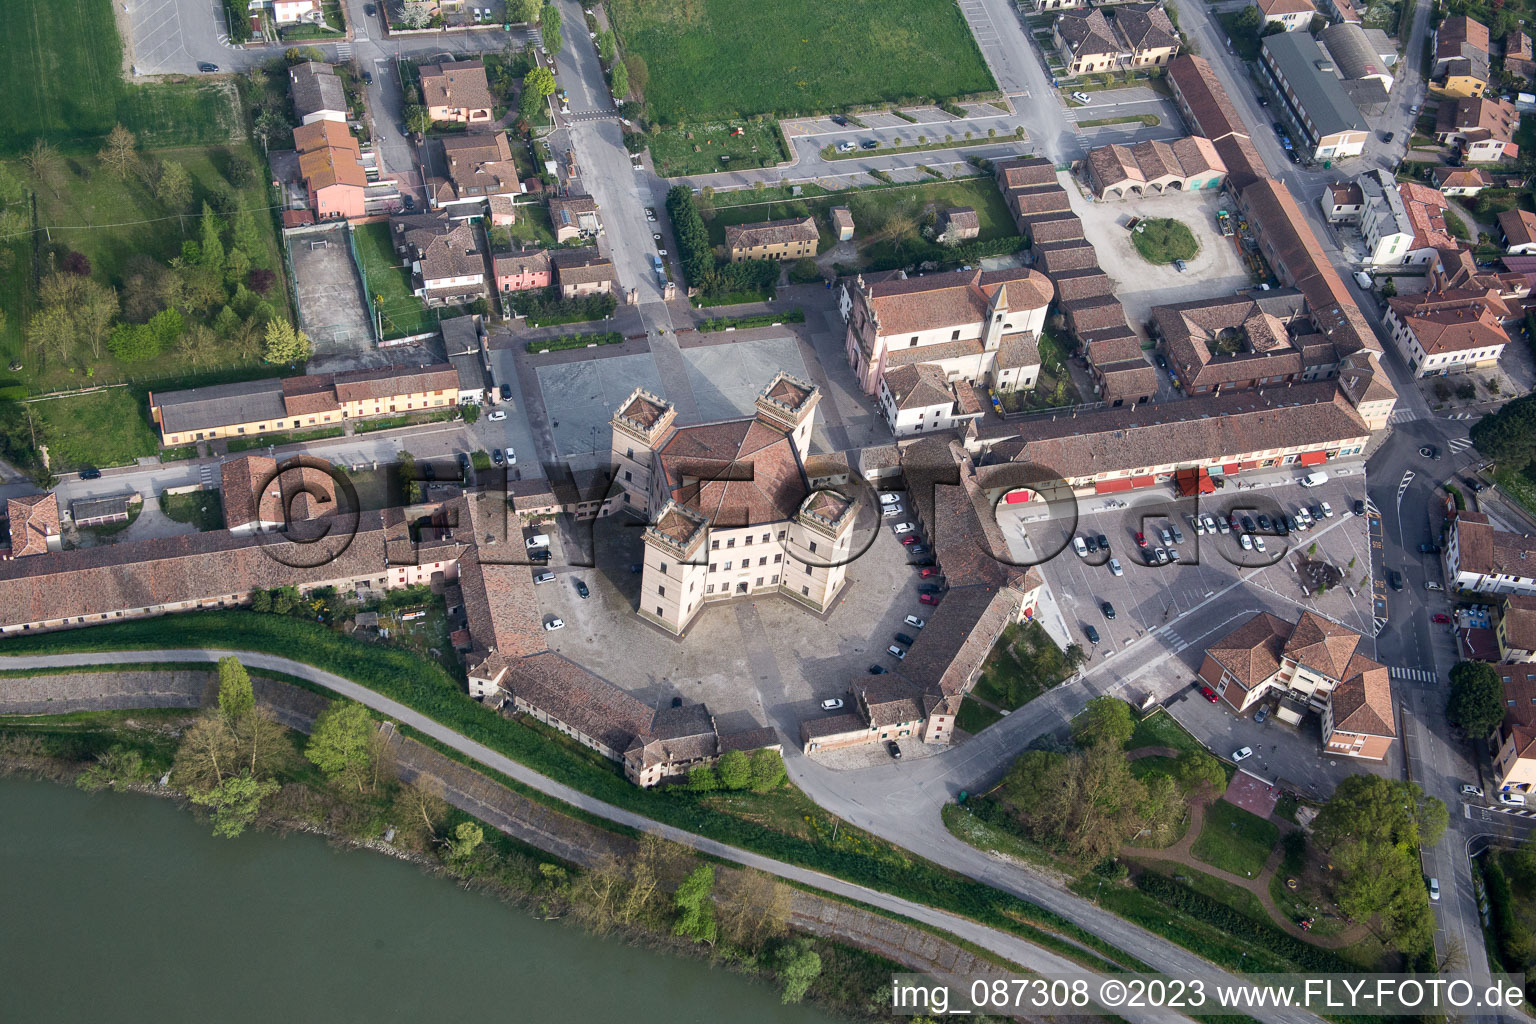 Mesola in the state Emilia Romagna, Italy from the drone perspective